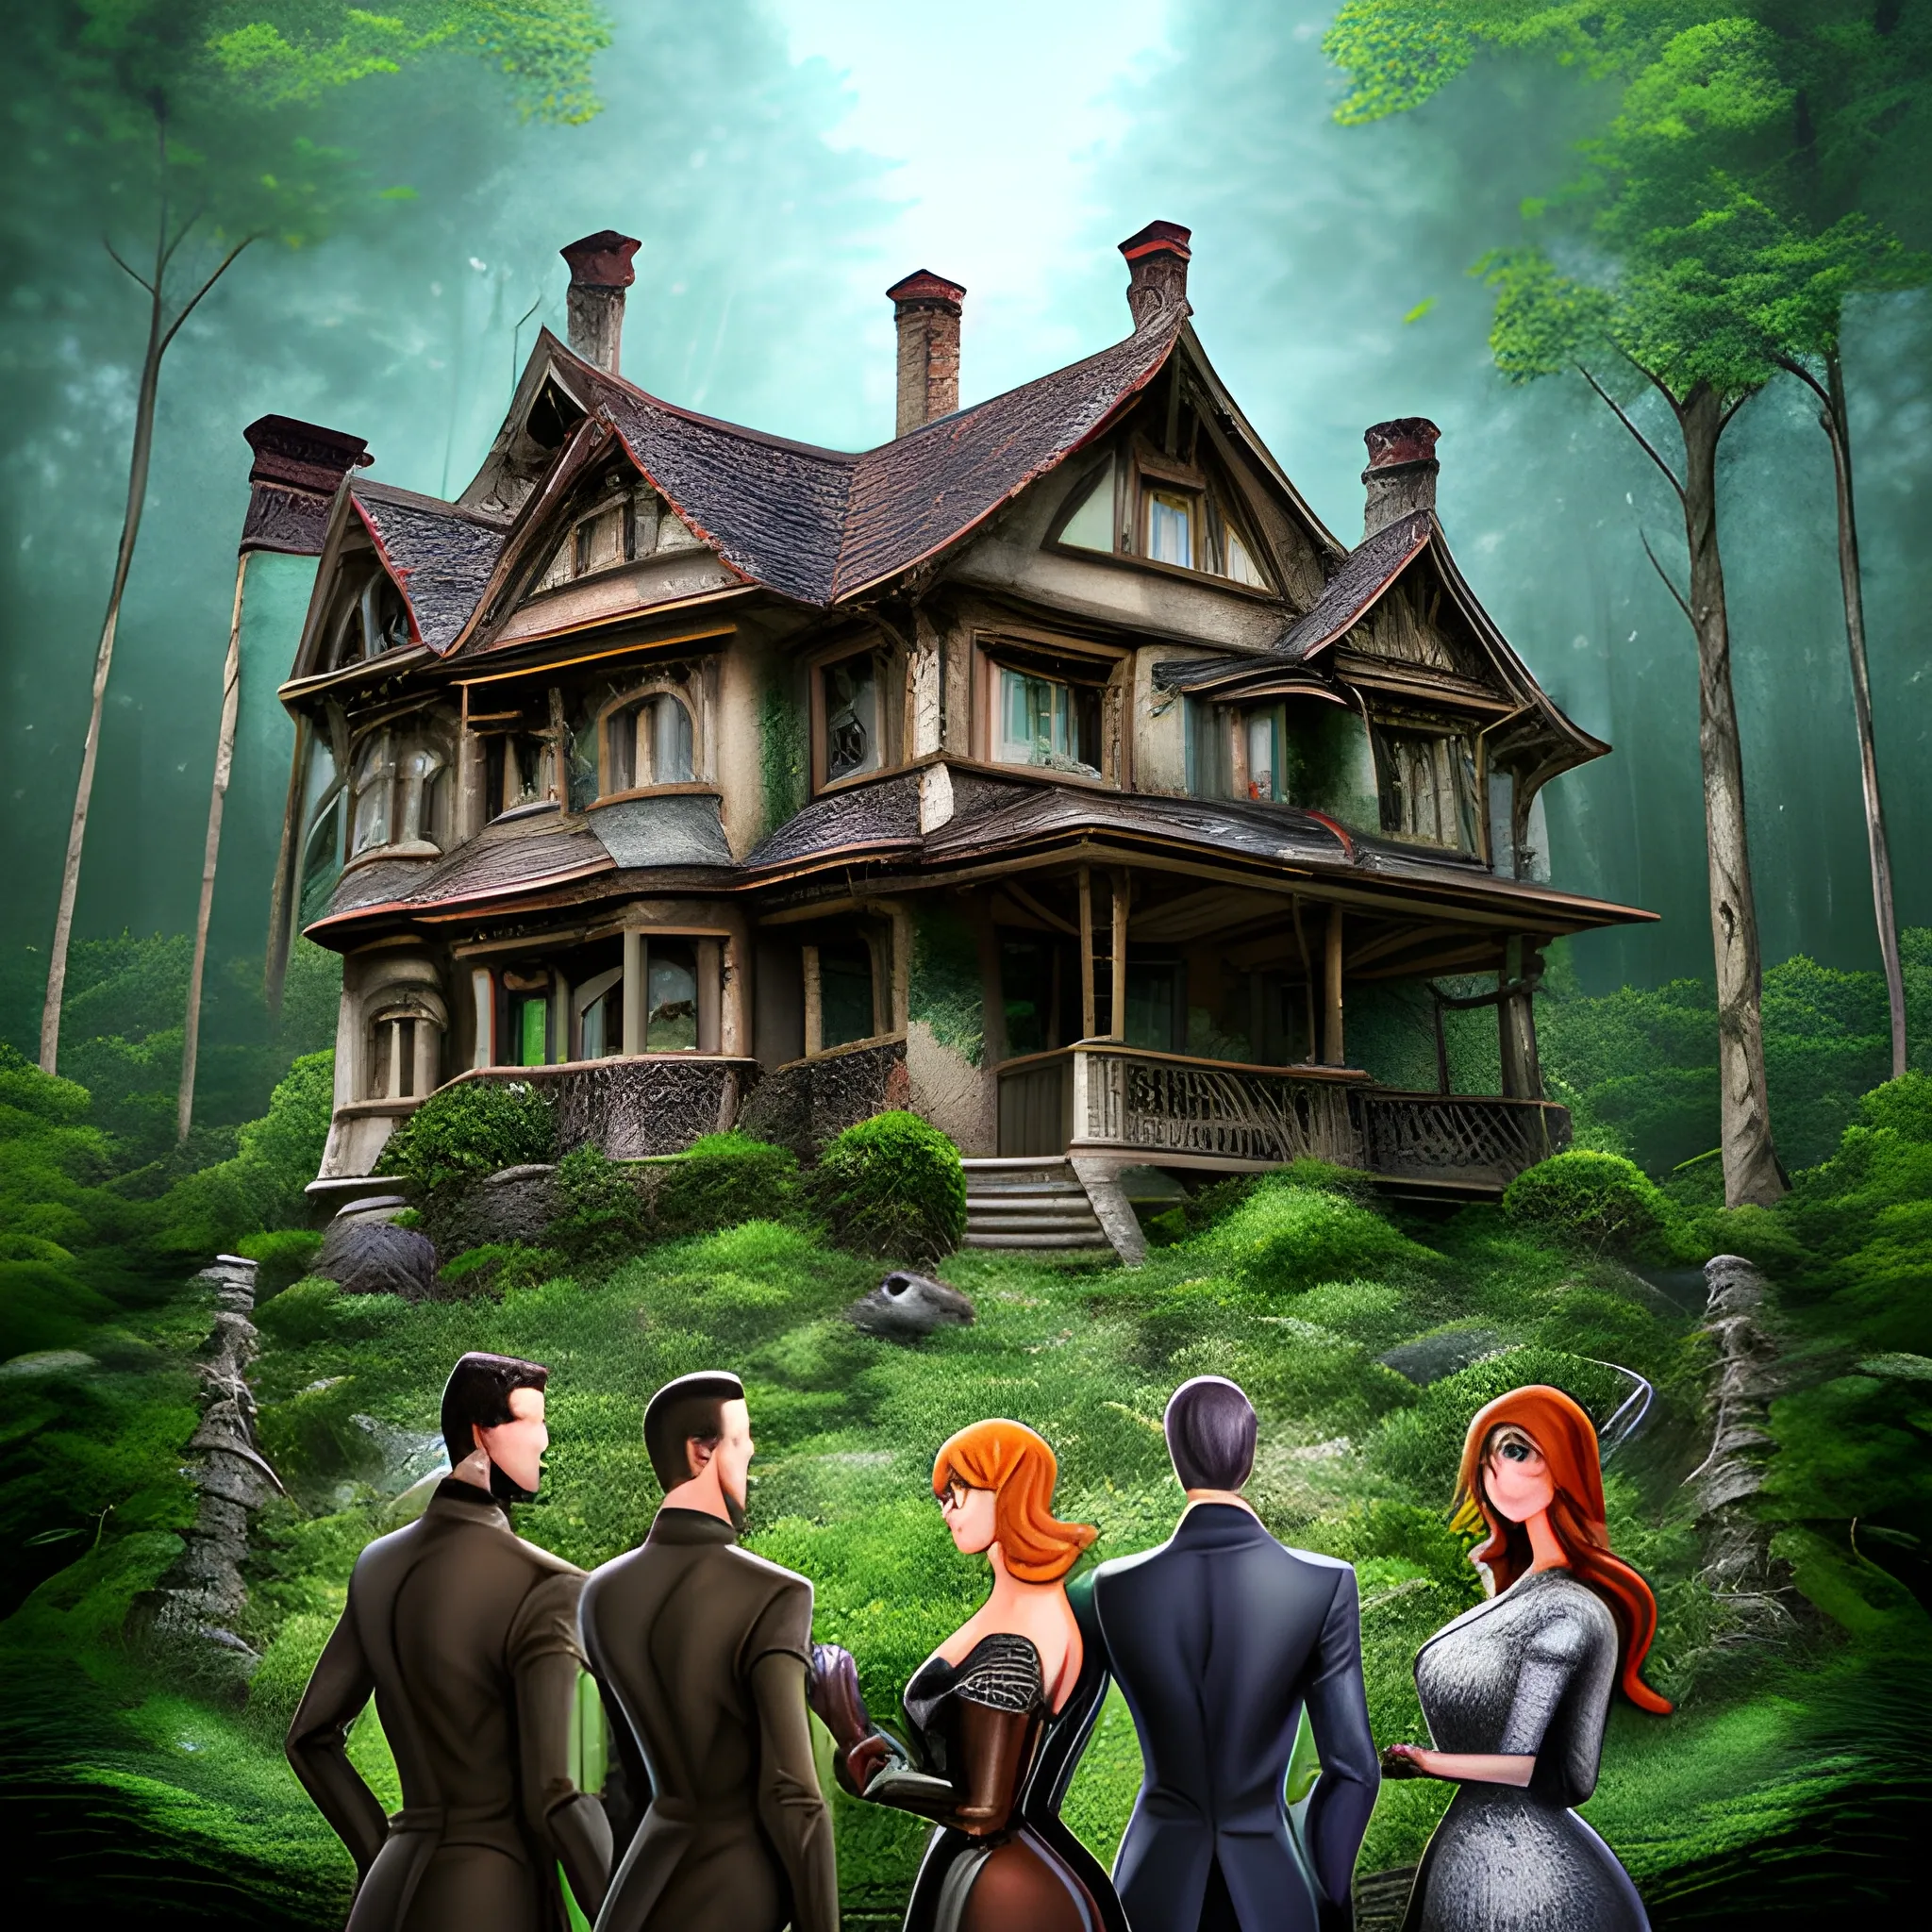 Four children (two boys and two girls) standing at the edge of a dense forest, looking with curiosity and wariness at an old and scary house that appeared between the trees. Fine details of the trees, the house, and the children with realistic clothes and clear facial expressions. Bright colors, simplified details, exaggerated facial expressions. Blurry colors, trees that appear As if animated, the house seems to come to life. Cartoon, fantasy, realistic













